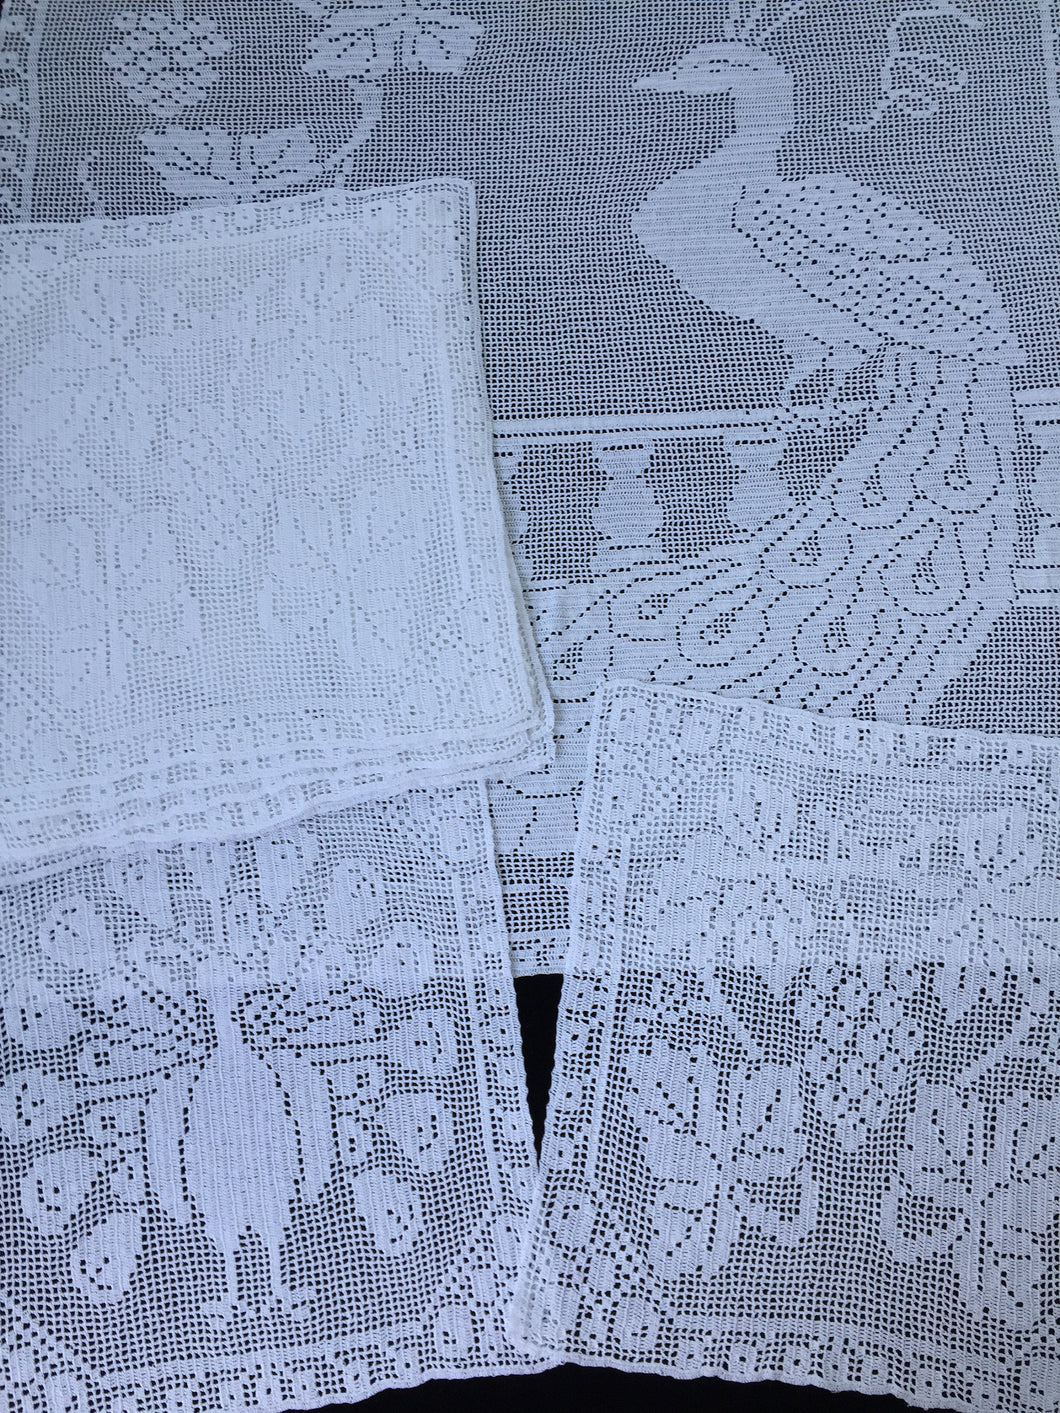 Antique White Lace Panels for Making the Mary Card Designed 